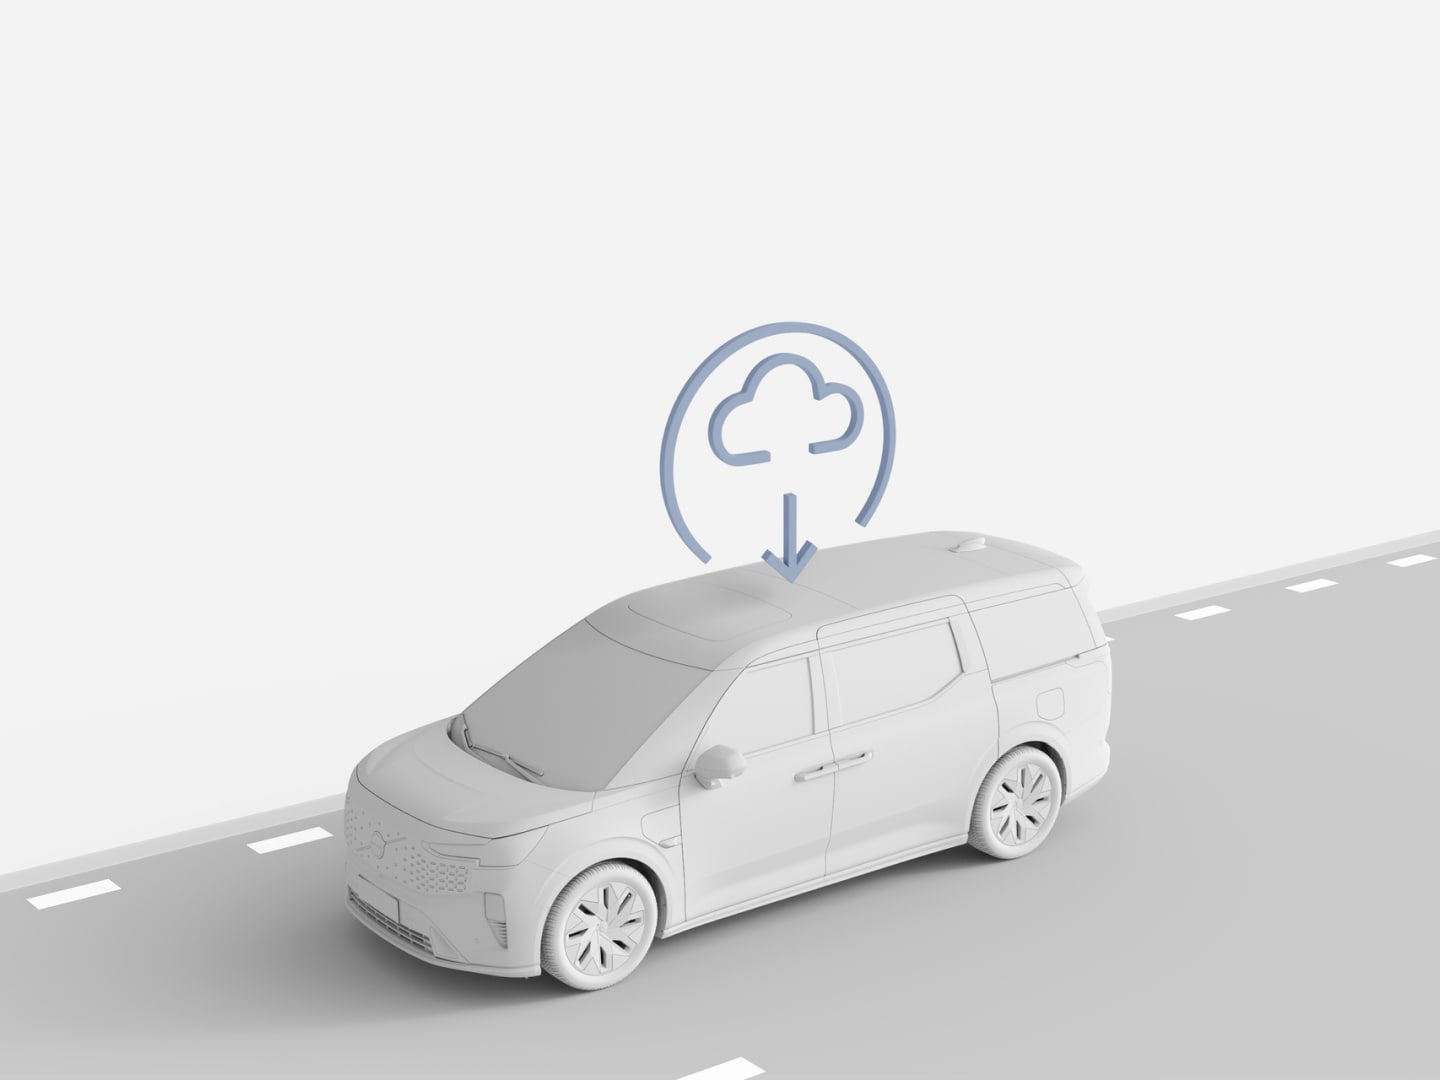 Illustrated image of the Volvo EM90 during a cloud-based software update. 